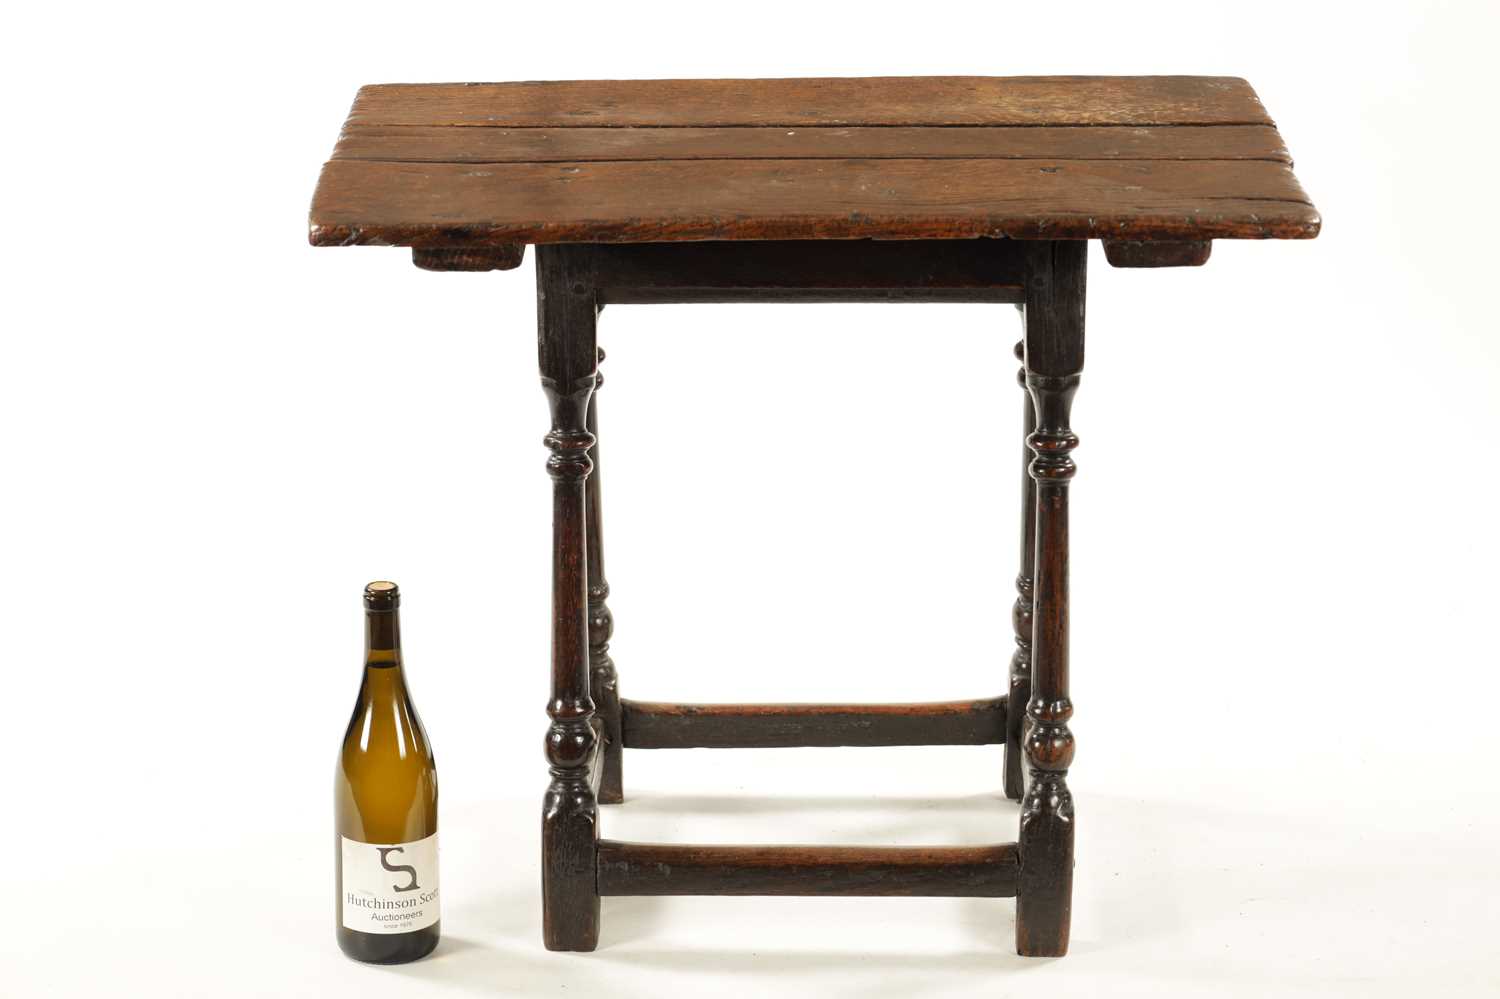 A LATE 17TH CENTURY OAK RECTANGULAR SMALL TABLE - Image 3 of 6